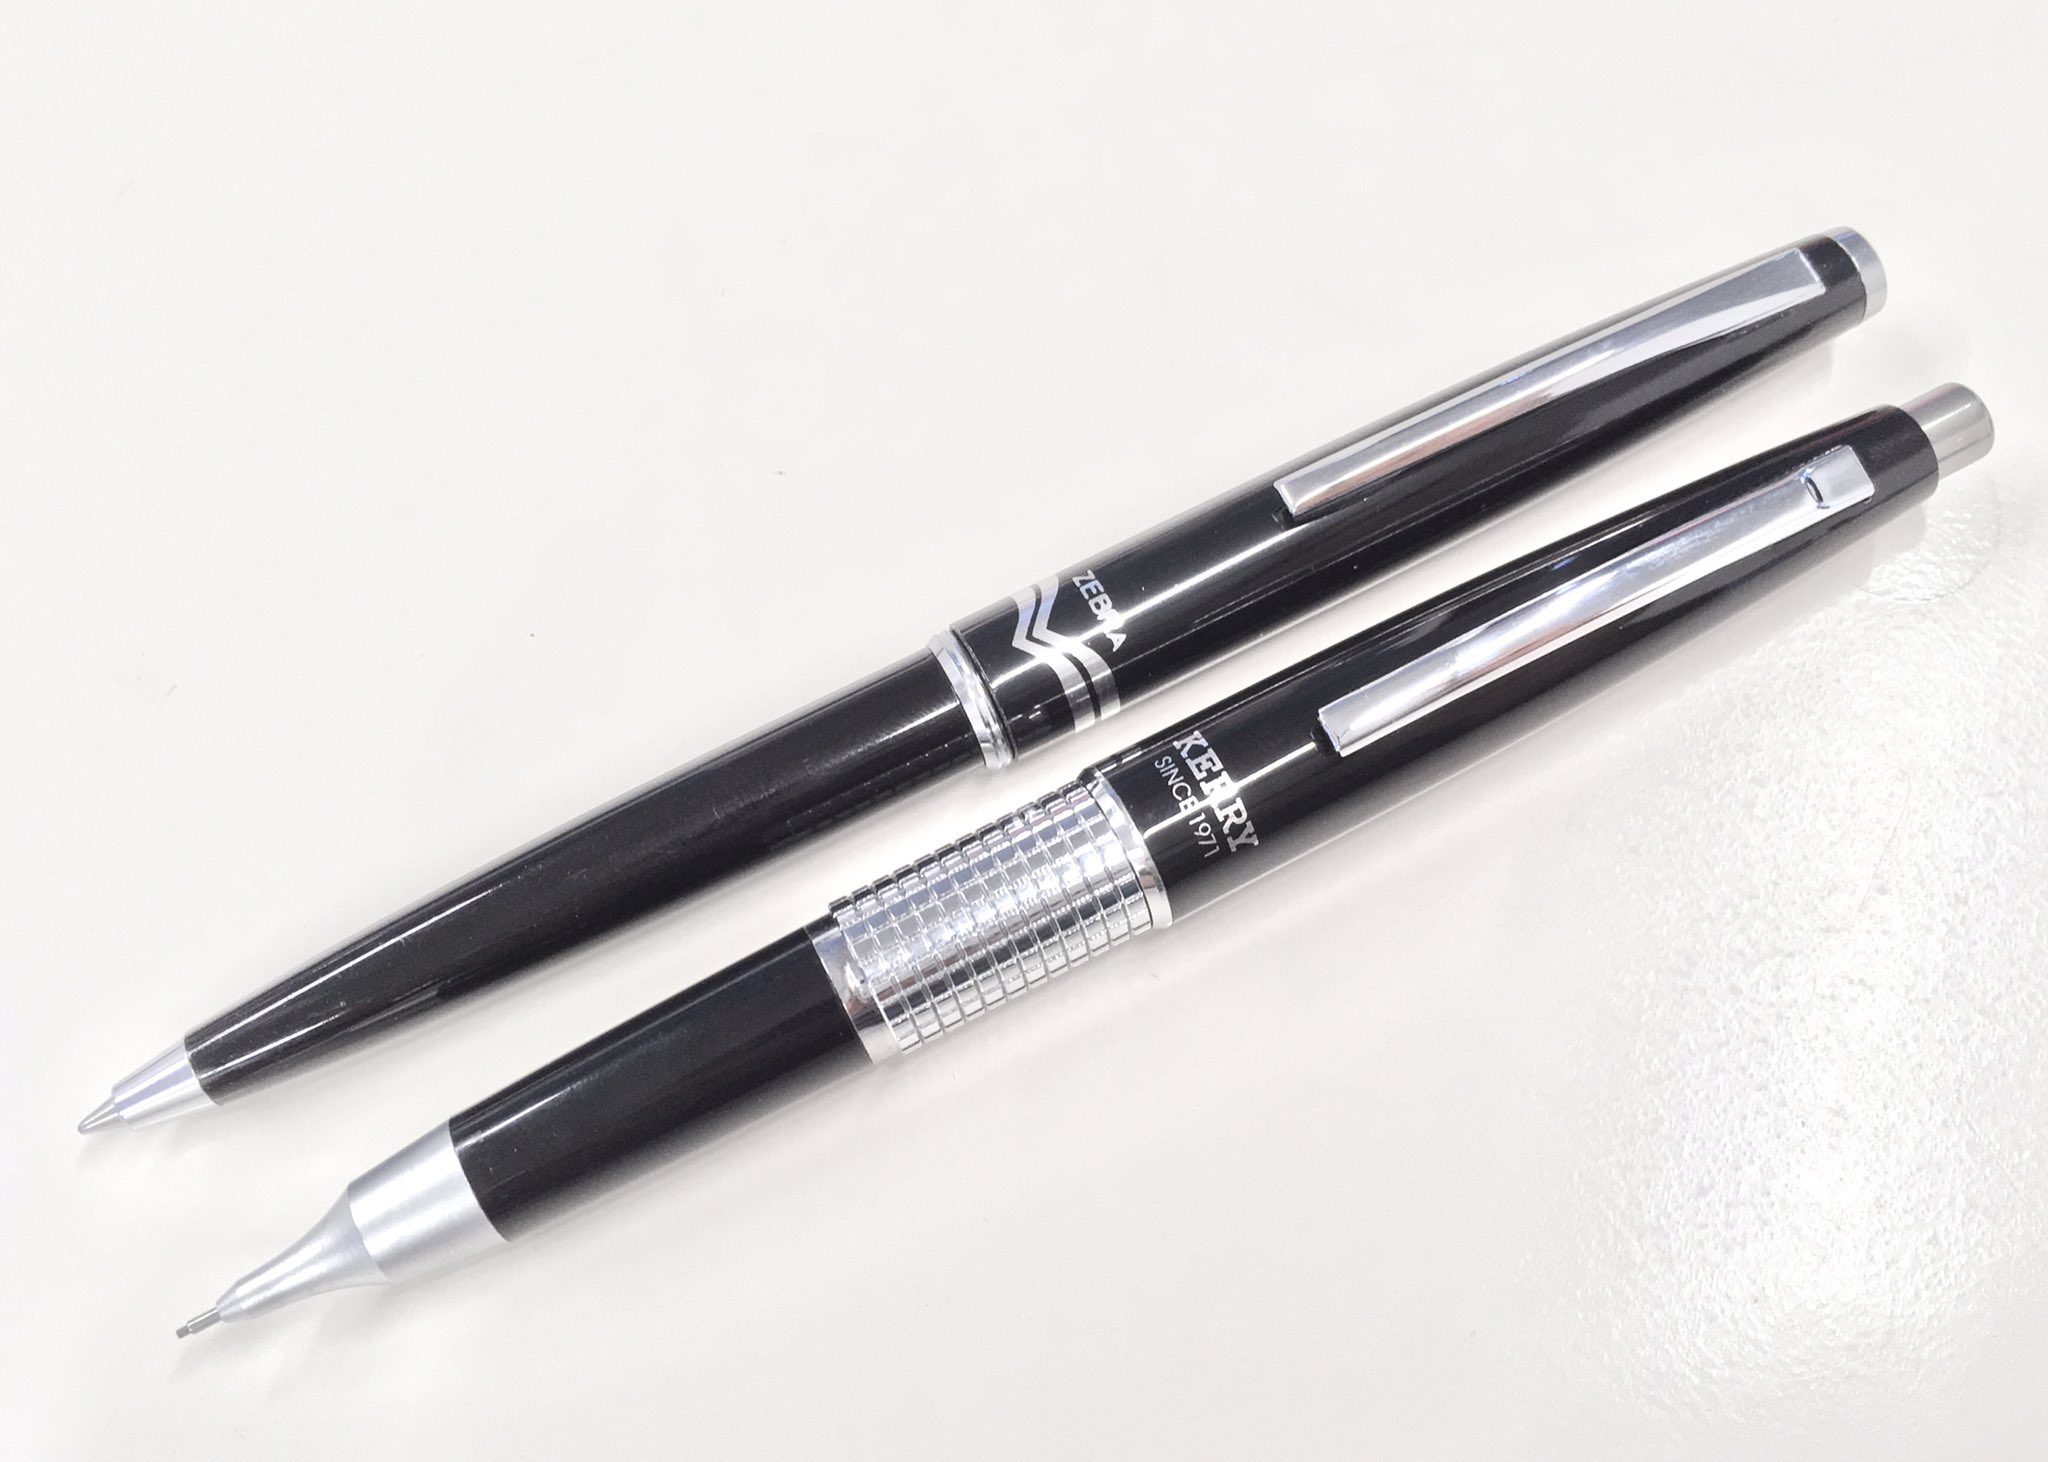 Kelvin Pang This Vintage Zebra Pocket Ballpoint Is Shorter Than Pentel Kerry When Capped But The Same Length When Posted Thewritematch シャーペン 万年cil T Co Uvrclobcow Twitter